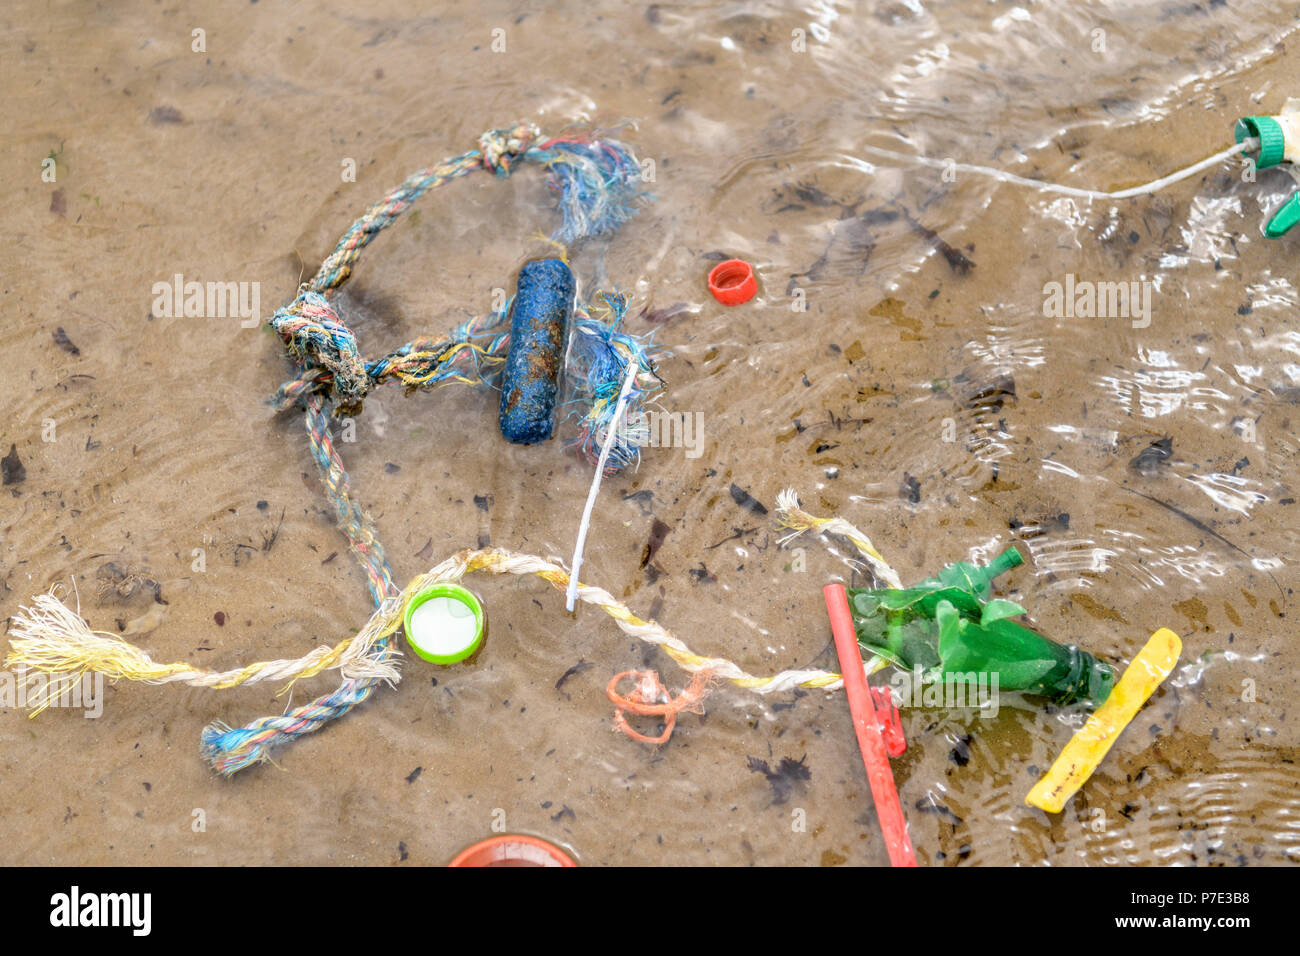 Plastic pollution in shallow sea water, North East England, UK Stock Photo